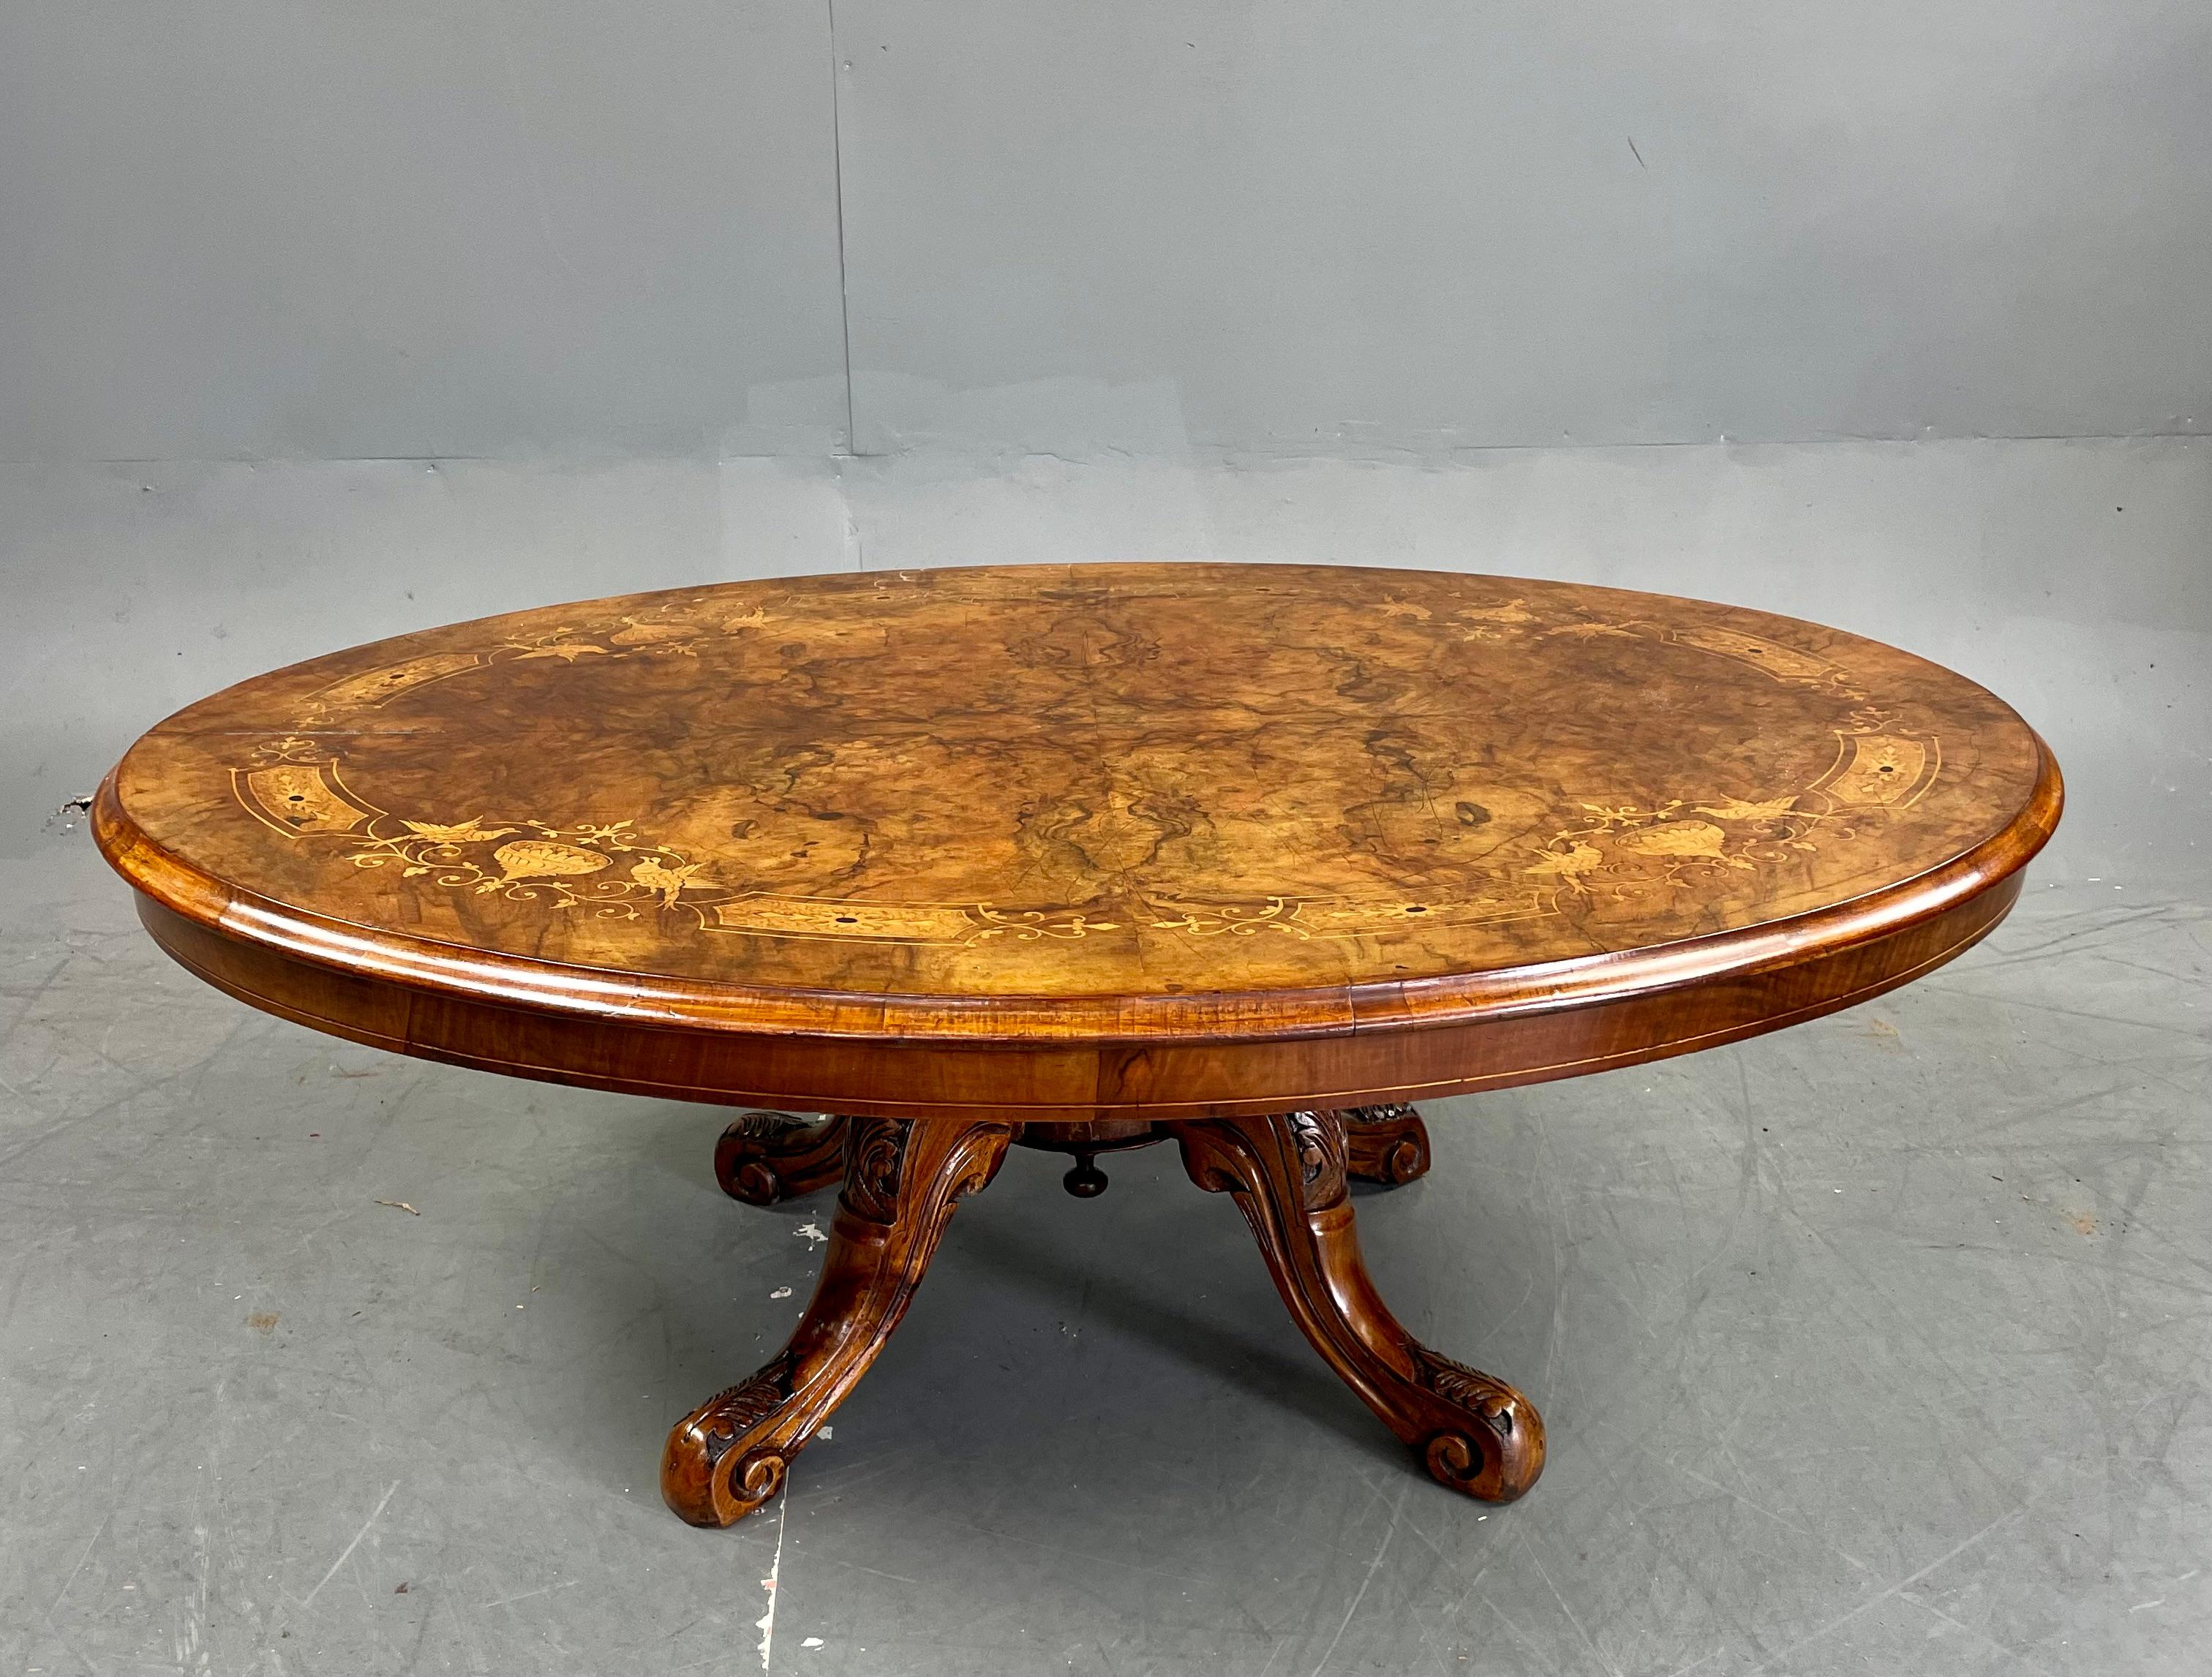 Fine quality Victorian burr walnut and box wood  inlaid coffee table circa 1870.
The base having four ring turn columns standing on carved cabriole legs 
The oval shaped top is a good size with a very good walnut colour and patina .
In very good